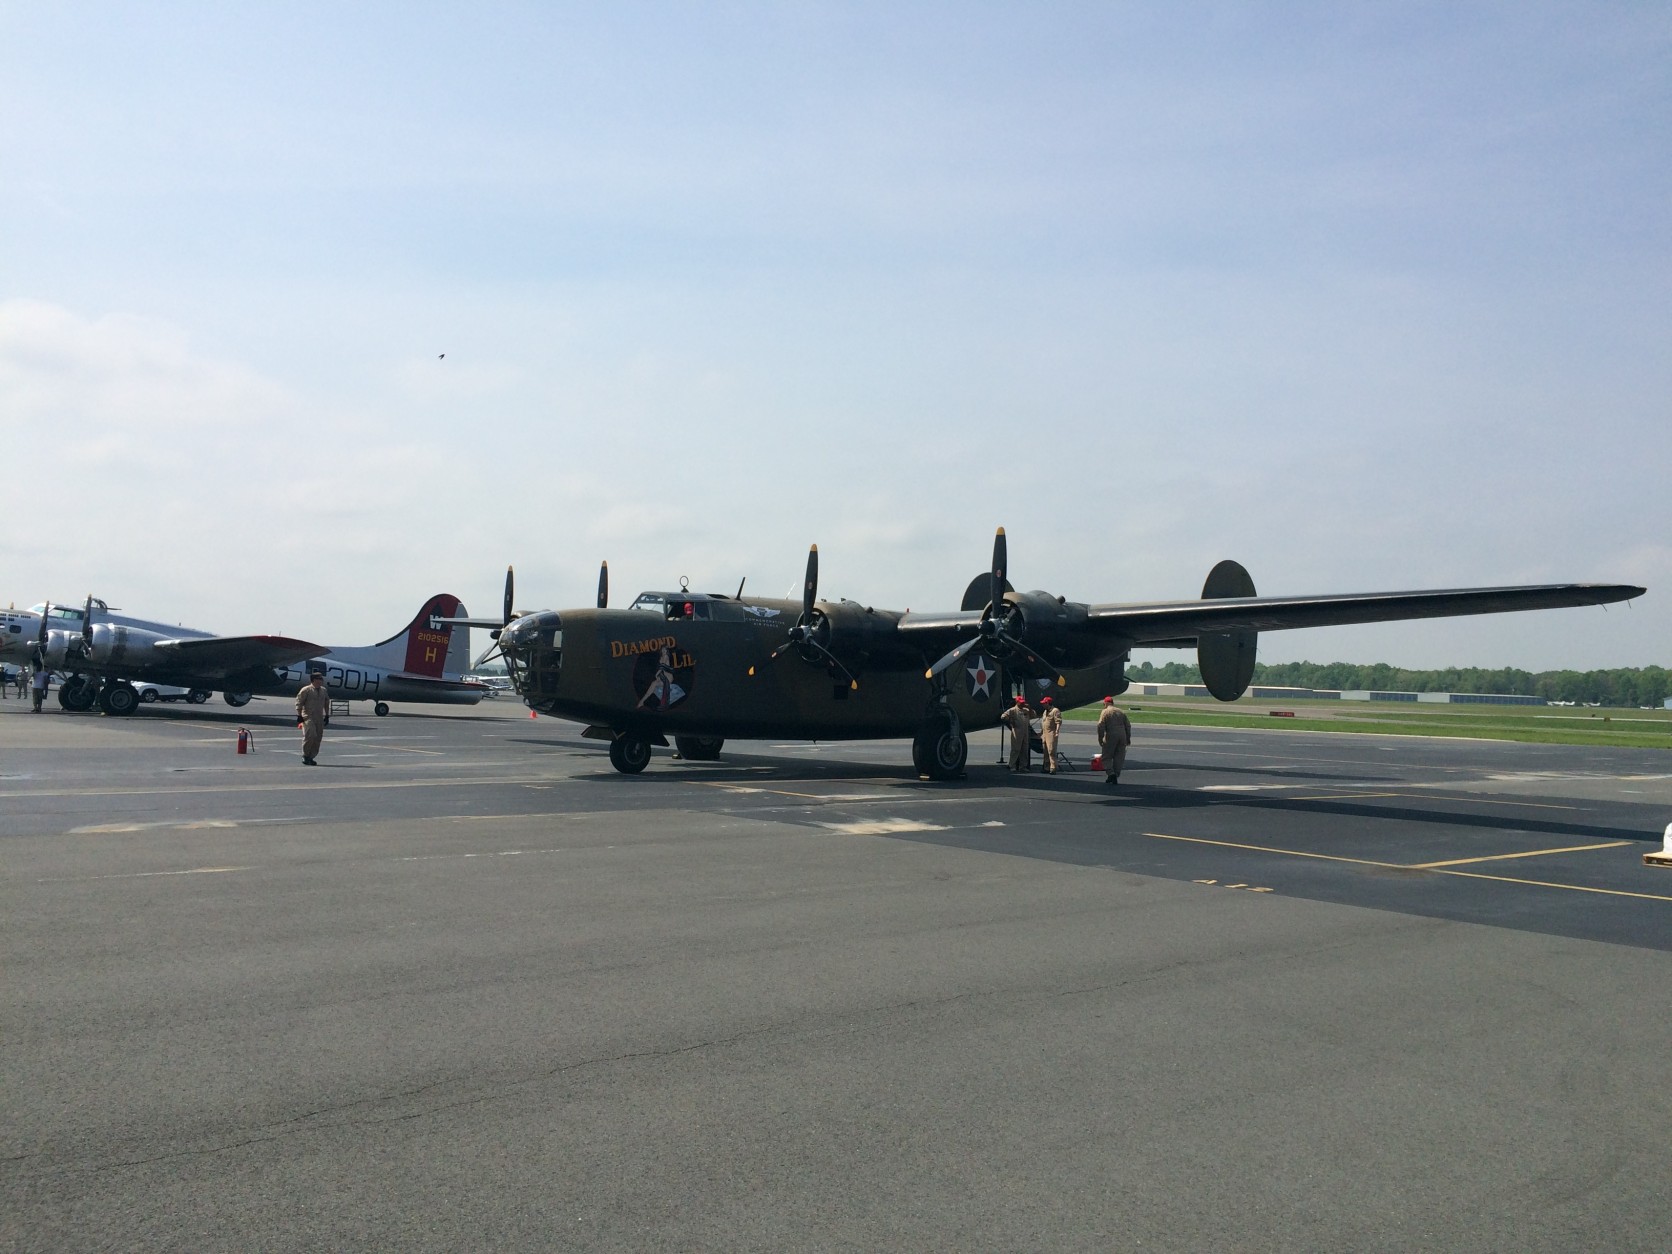 This B-24 Named "Diamond Lil" will be a part of Friday's Arsenal of Democracy flyover. (WTOP/Mike Murillo)